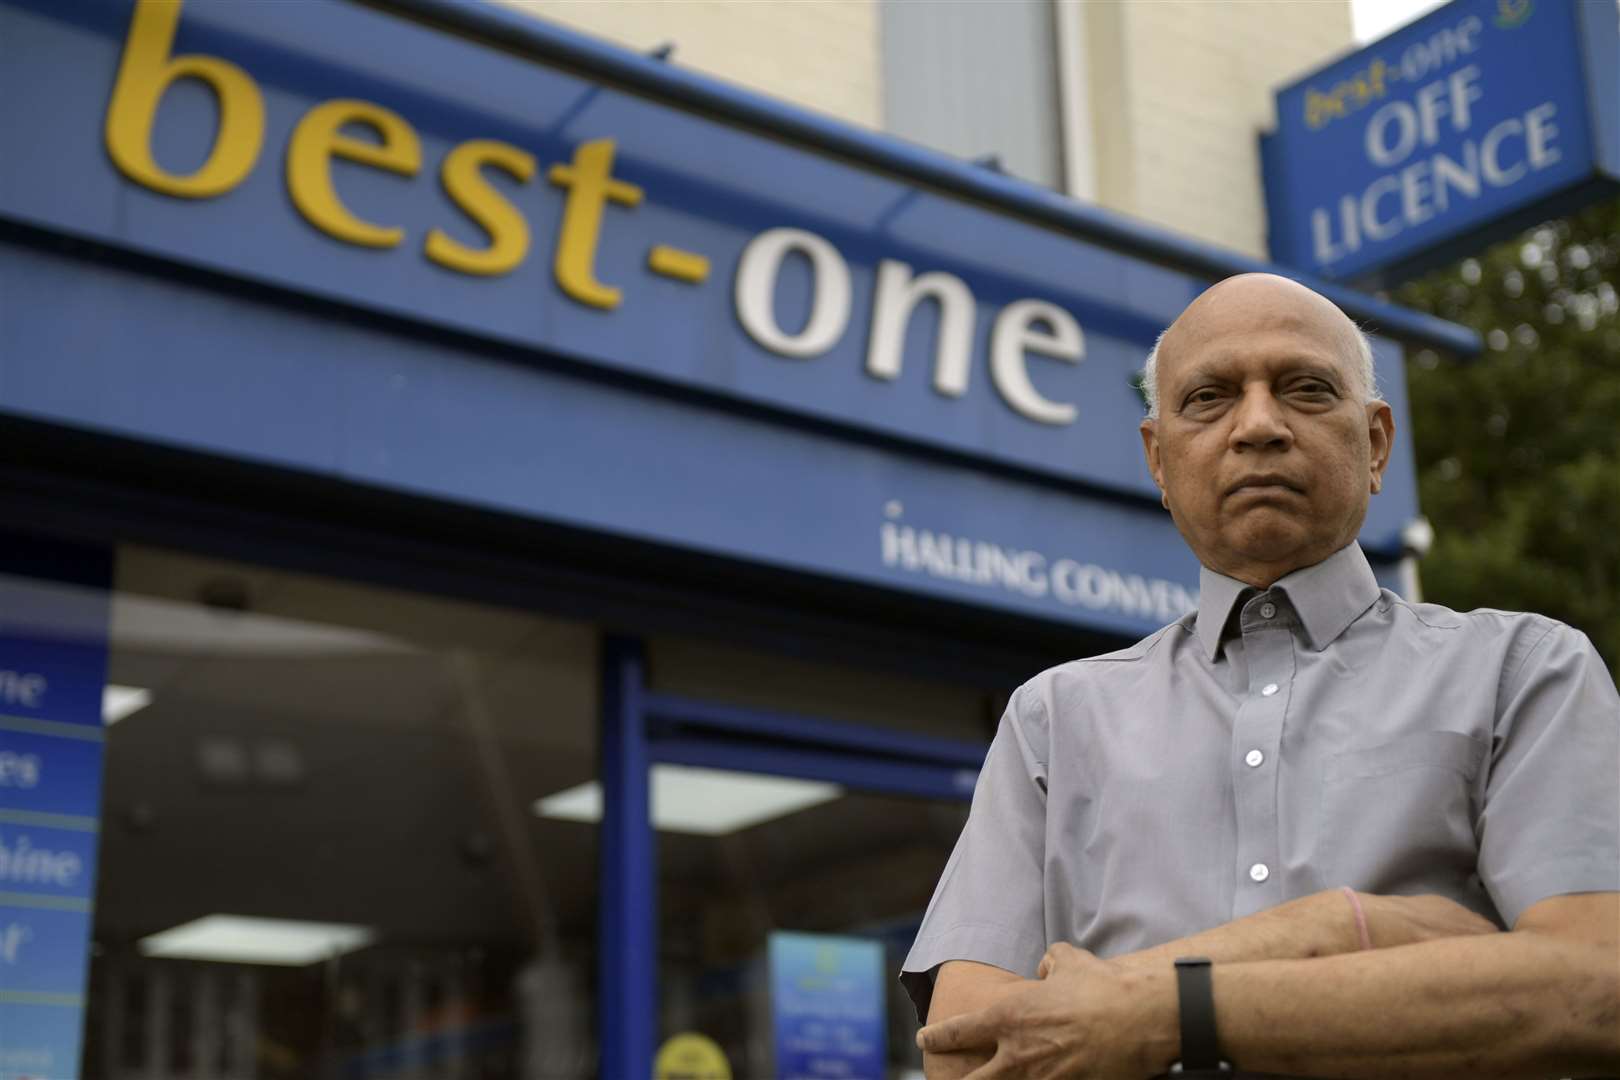 Vinay Patel outside Best One off licence in Halling. Picture: Barry Goodwin